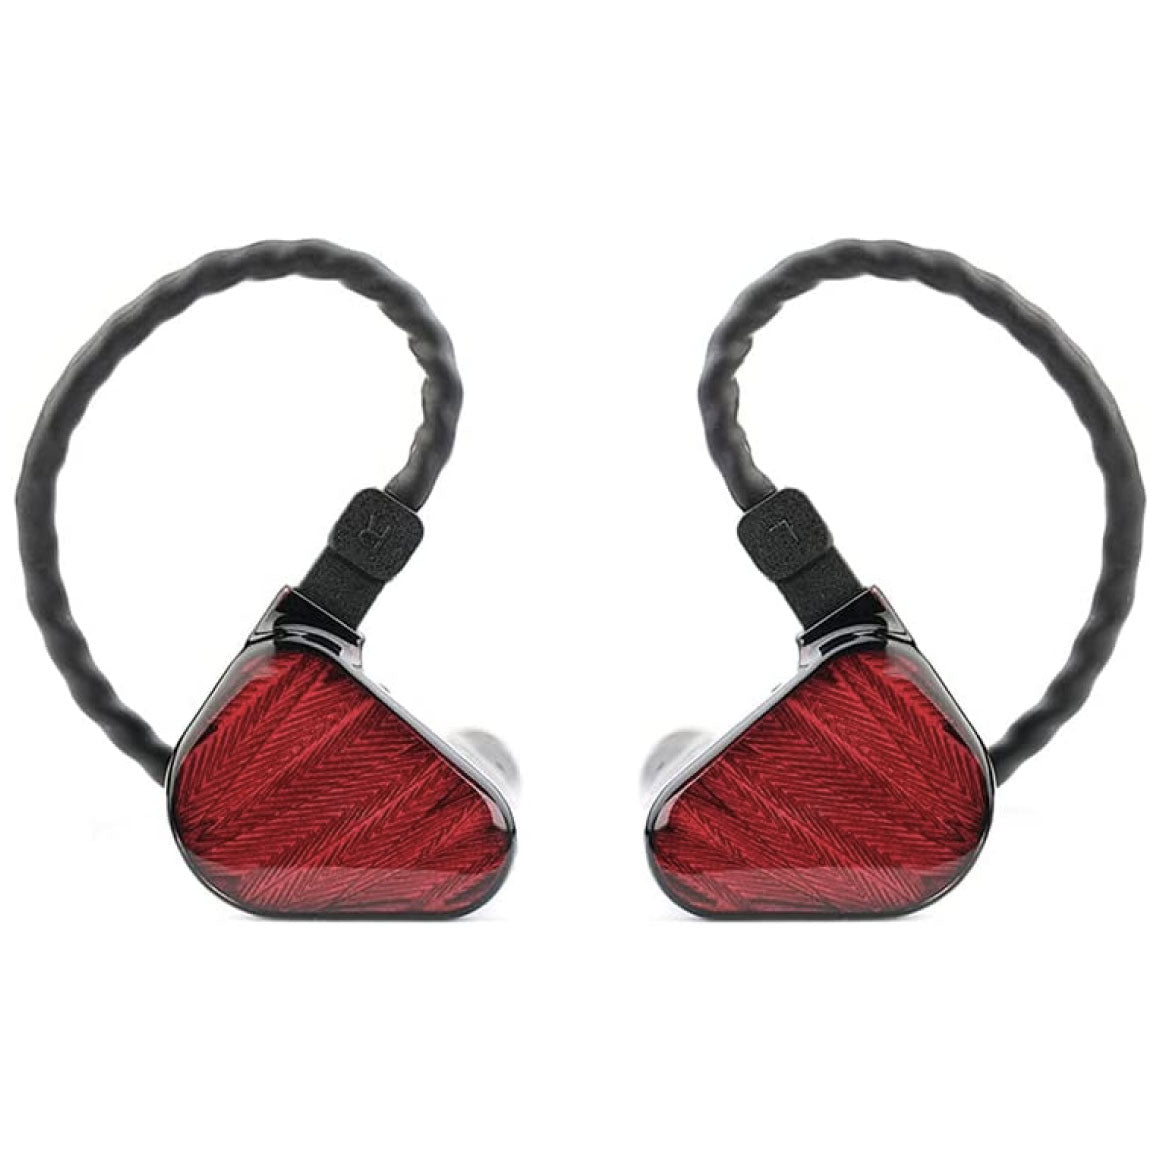 In-Ear Monitors for Audiophiles: Pros and Cons